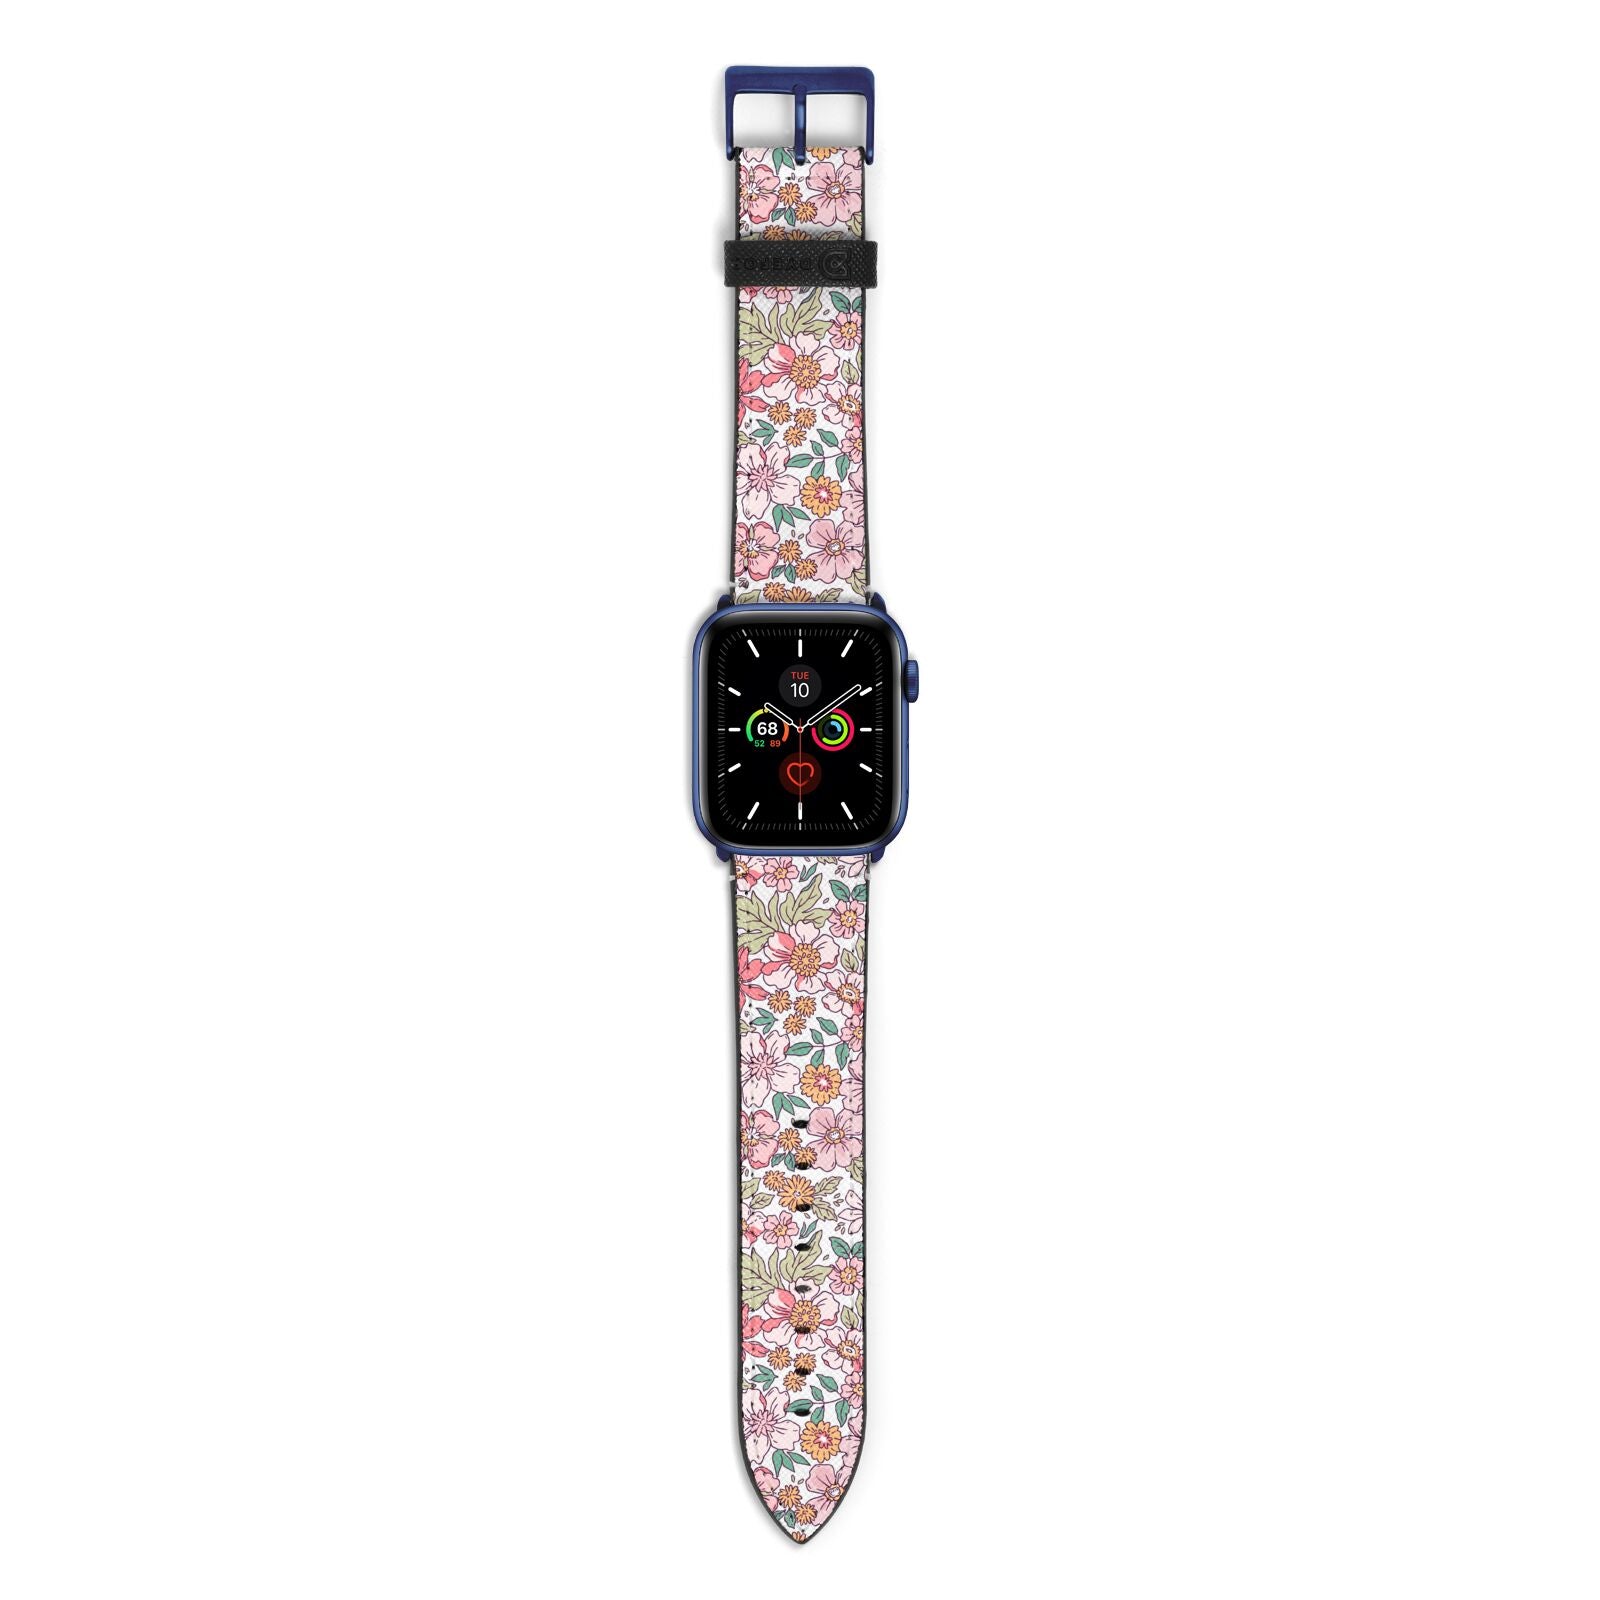 Small Floral Pattern Apple Watch Strap with Blue Hardware